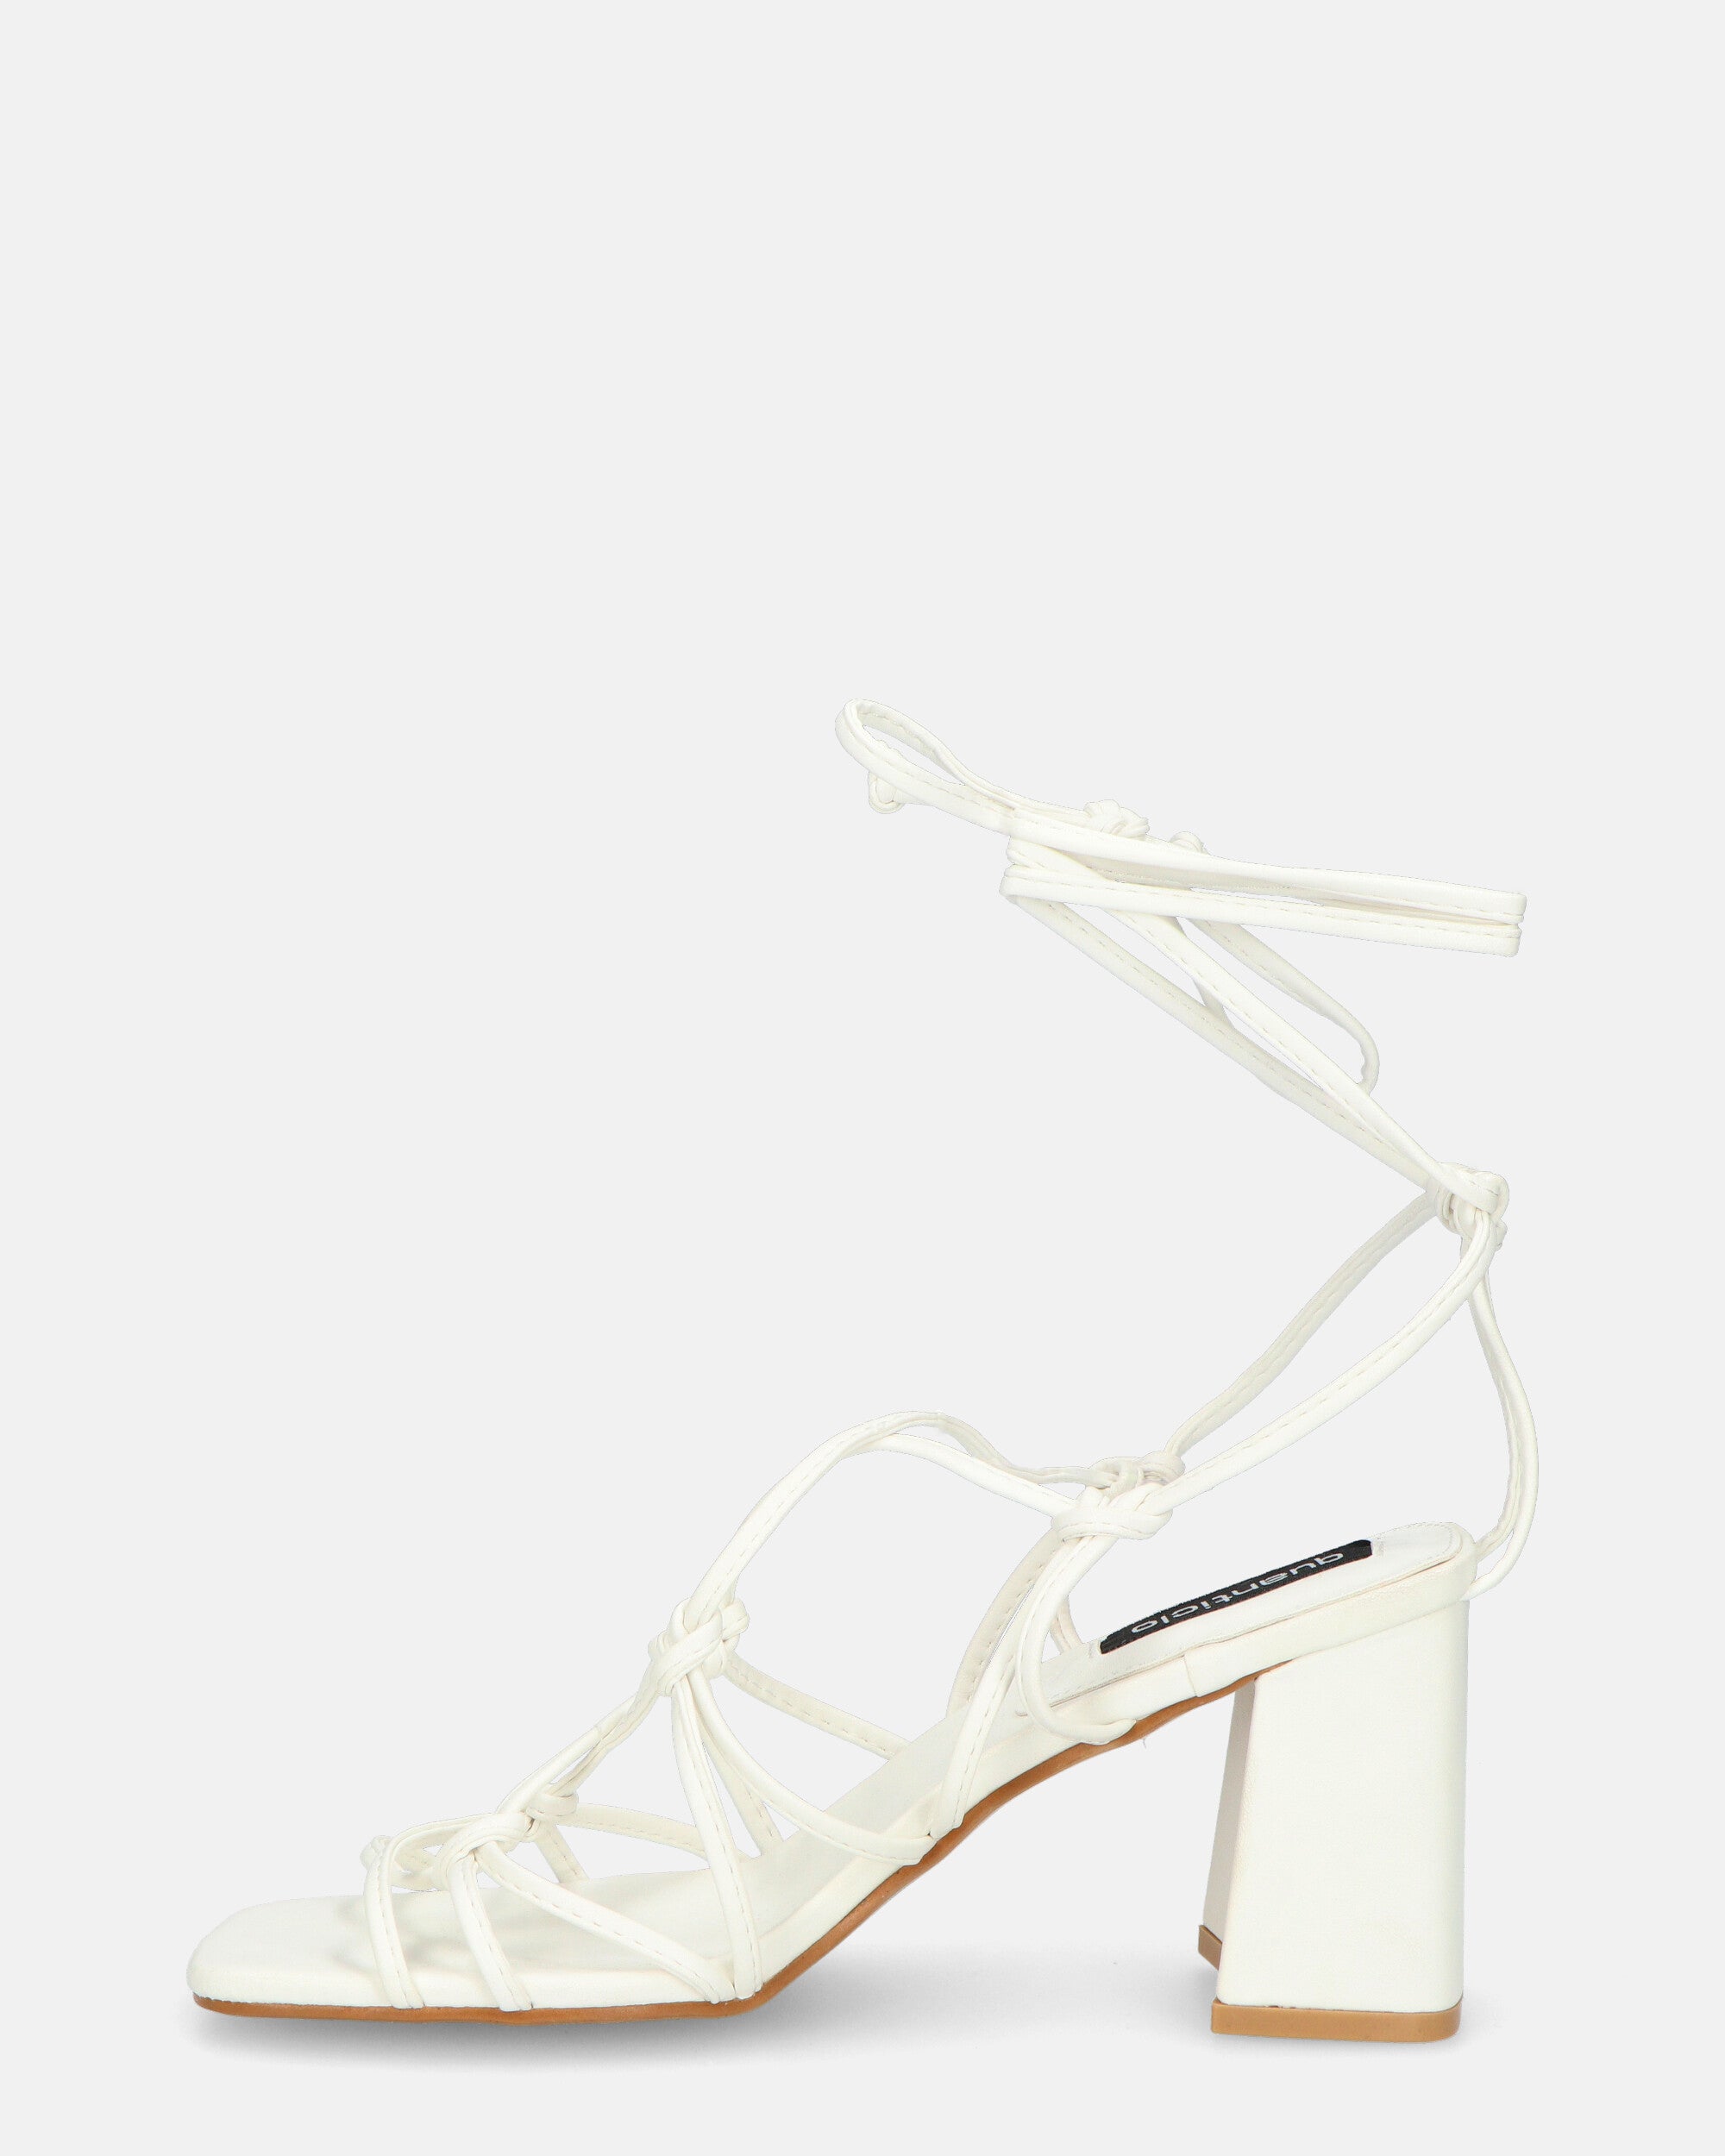 KAYLEE - white sandals with faux leather laces